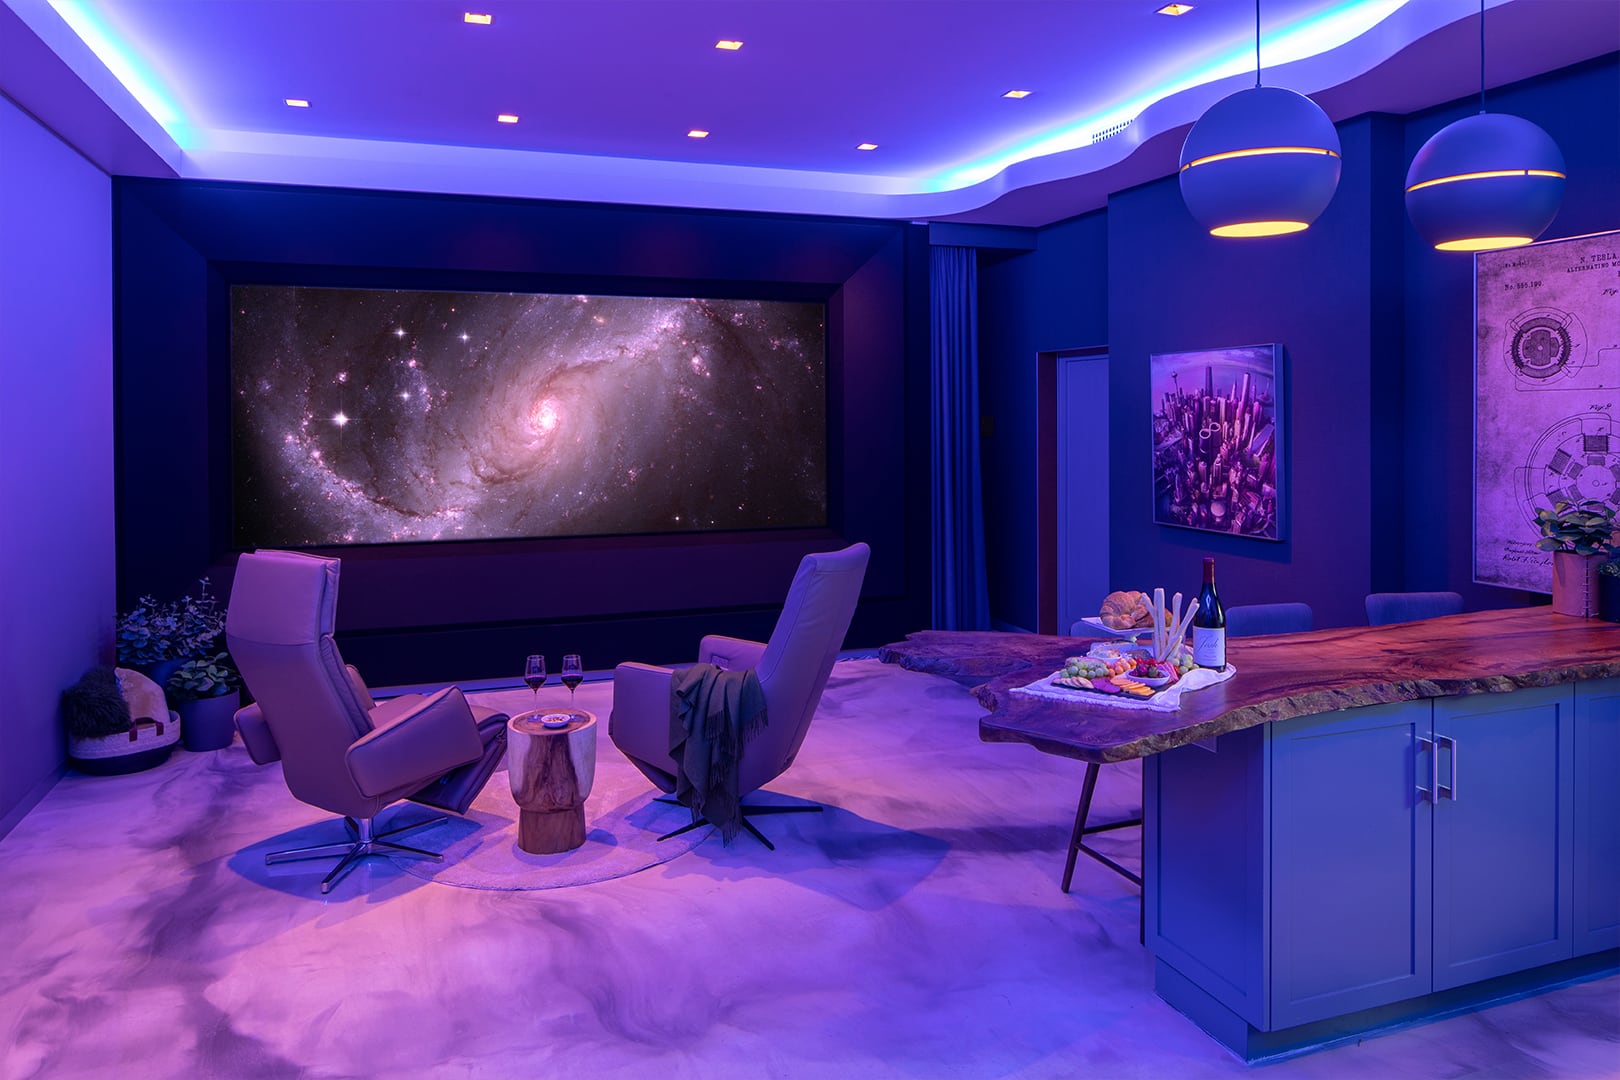 The Global Wave Showroom radiates in tranquil purple light, featuring a mesmerizing galaxy view on its theater screen, accompanied by opulent chairs and a carefully crafted wooden island adorned with delicious cuisine and wine.